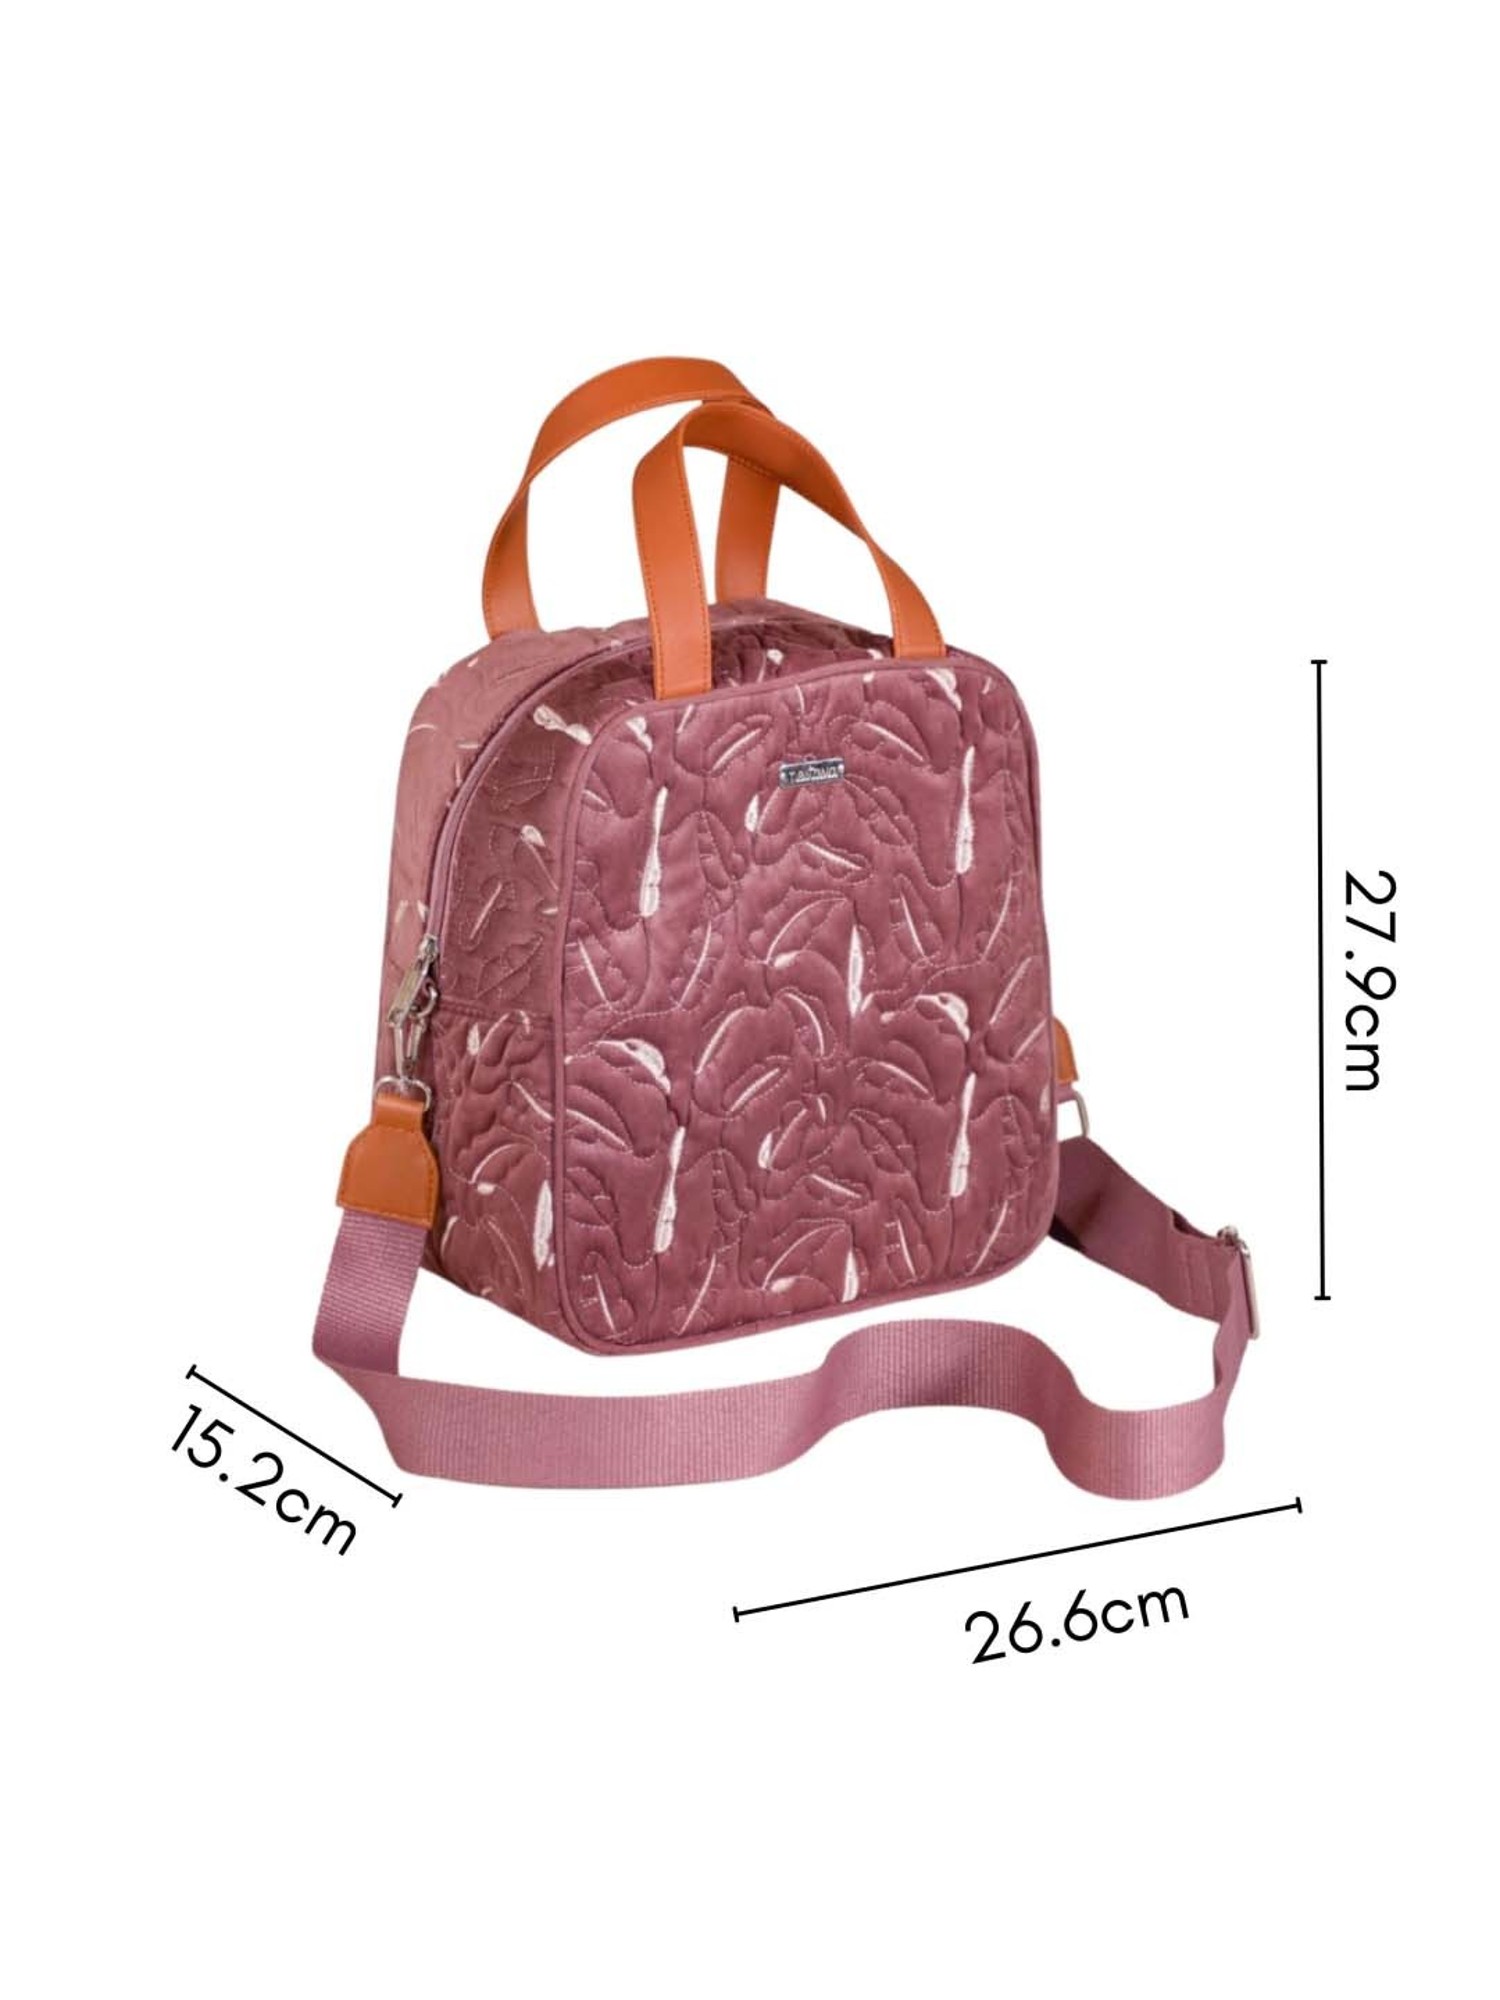 Buy Nestasia Insulated Lunch Bag With Adjustable Shoulder Strap & Handles  at Best Price @ Tata CLiQ